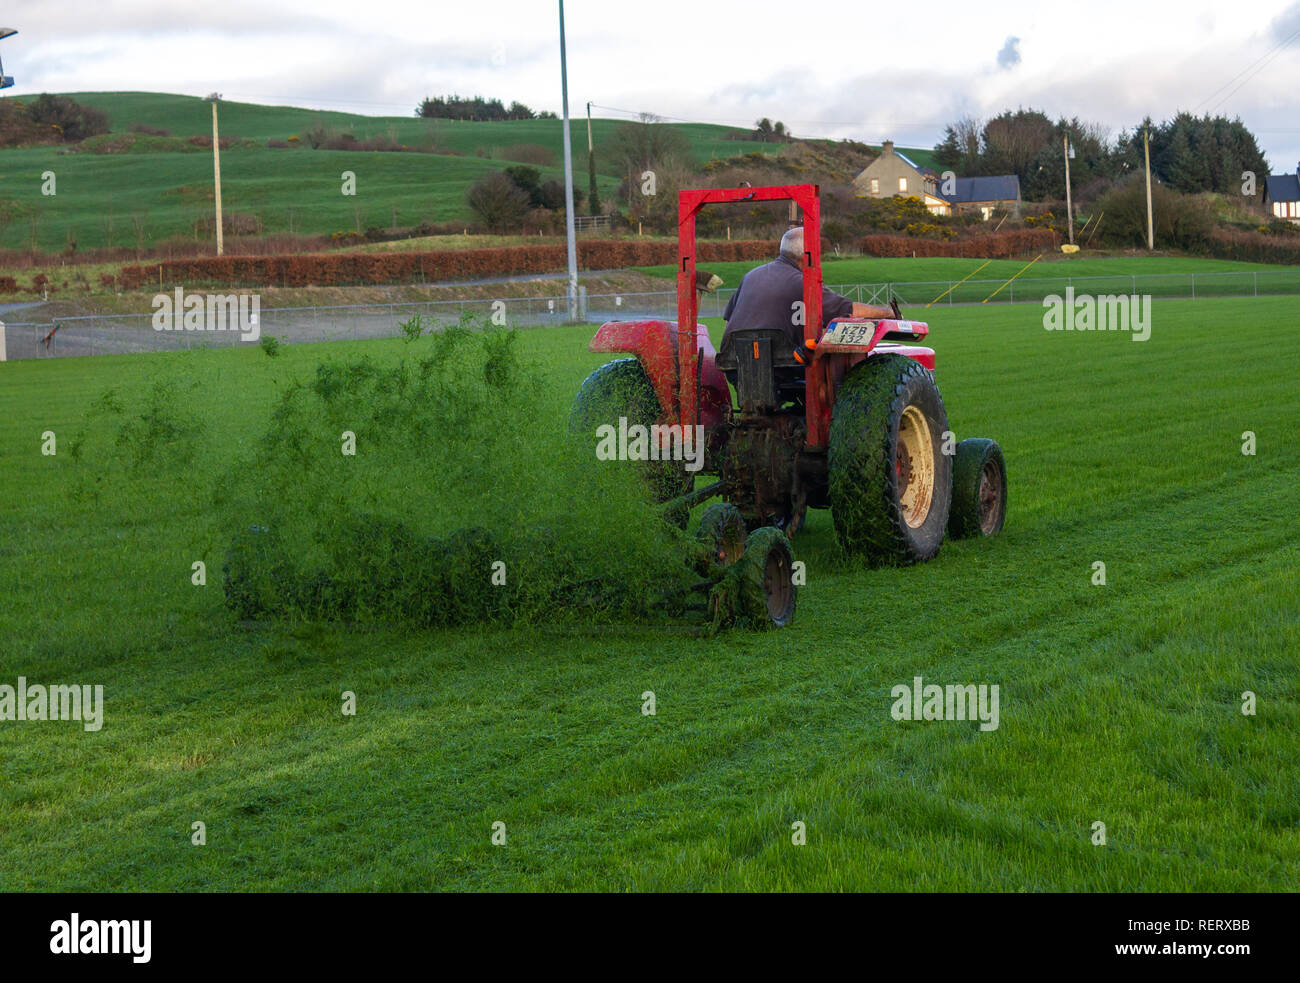 man on a tractor pulling a set of gang mowers Stock Photo